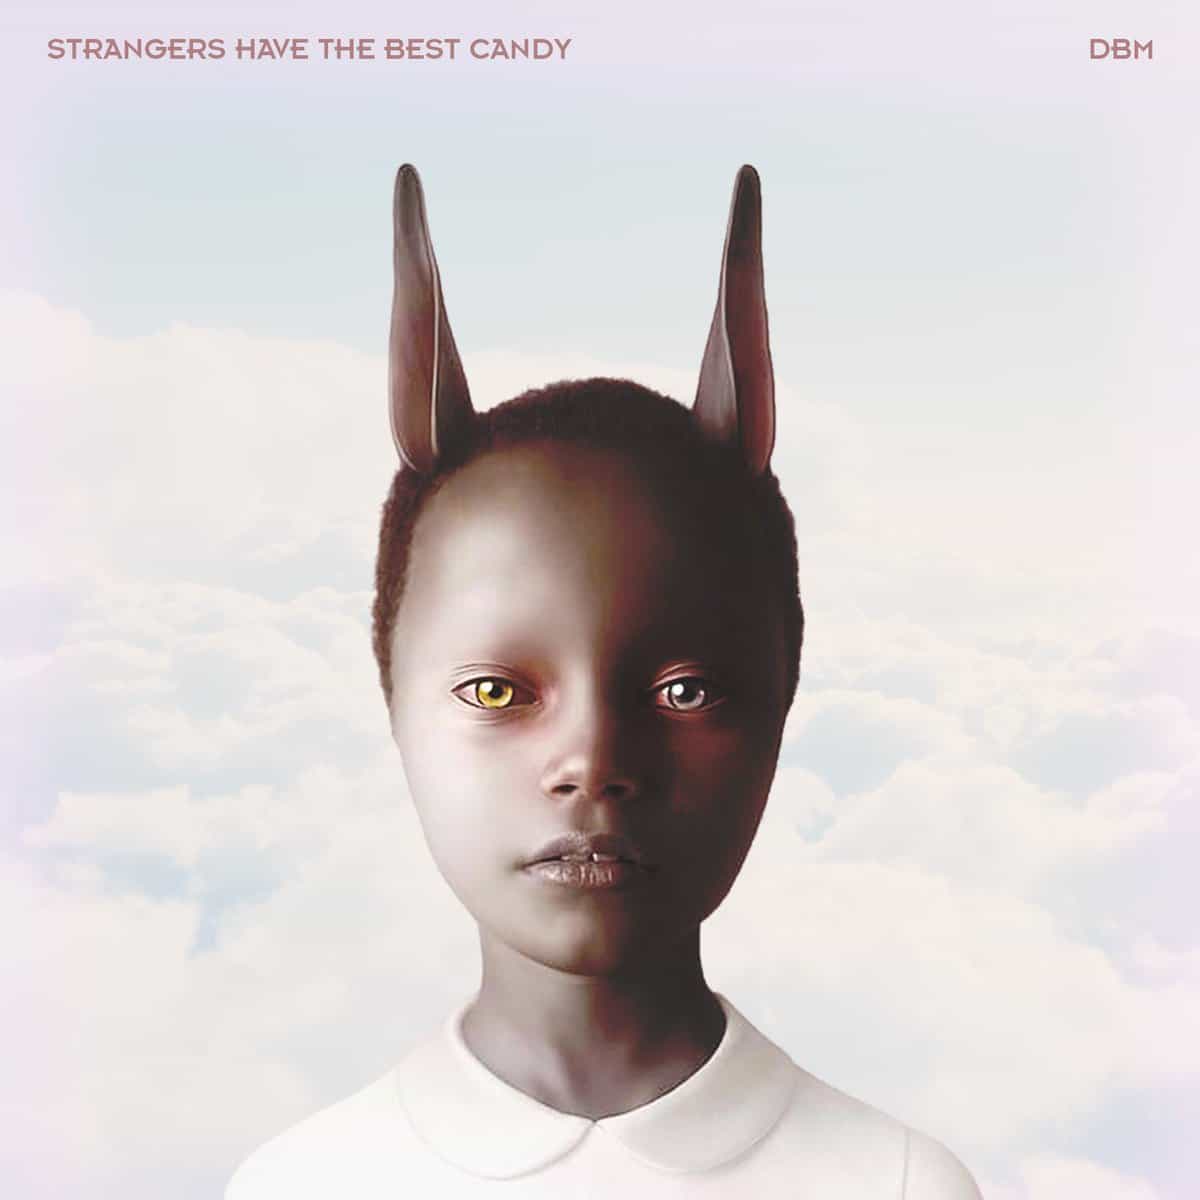 You need to update your chillwave playlist with DBM’s ‘Strangers have the best candy’